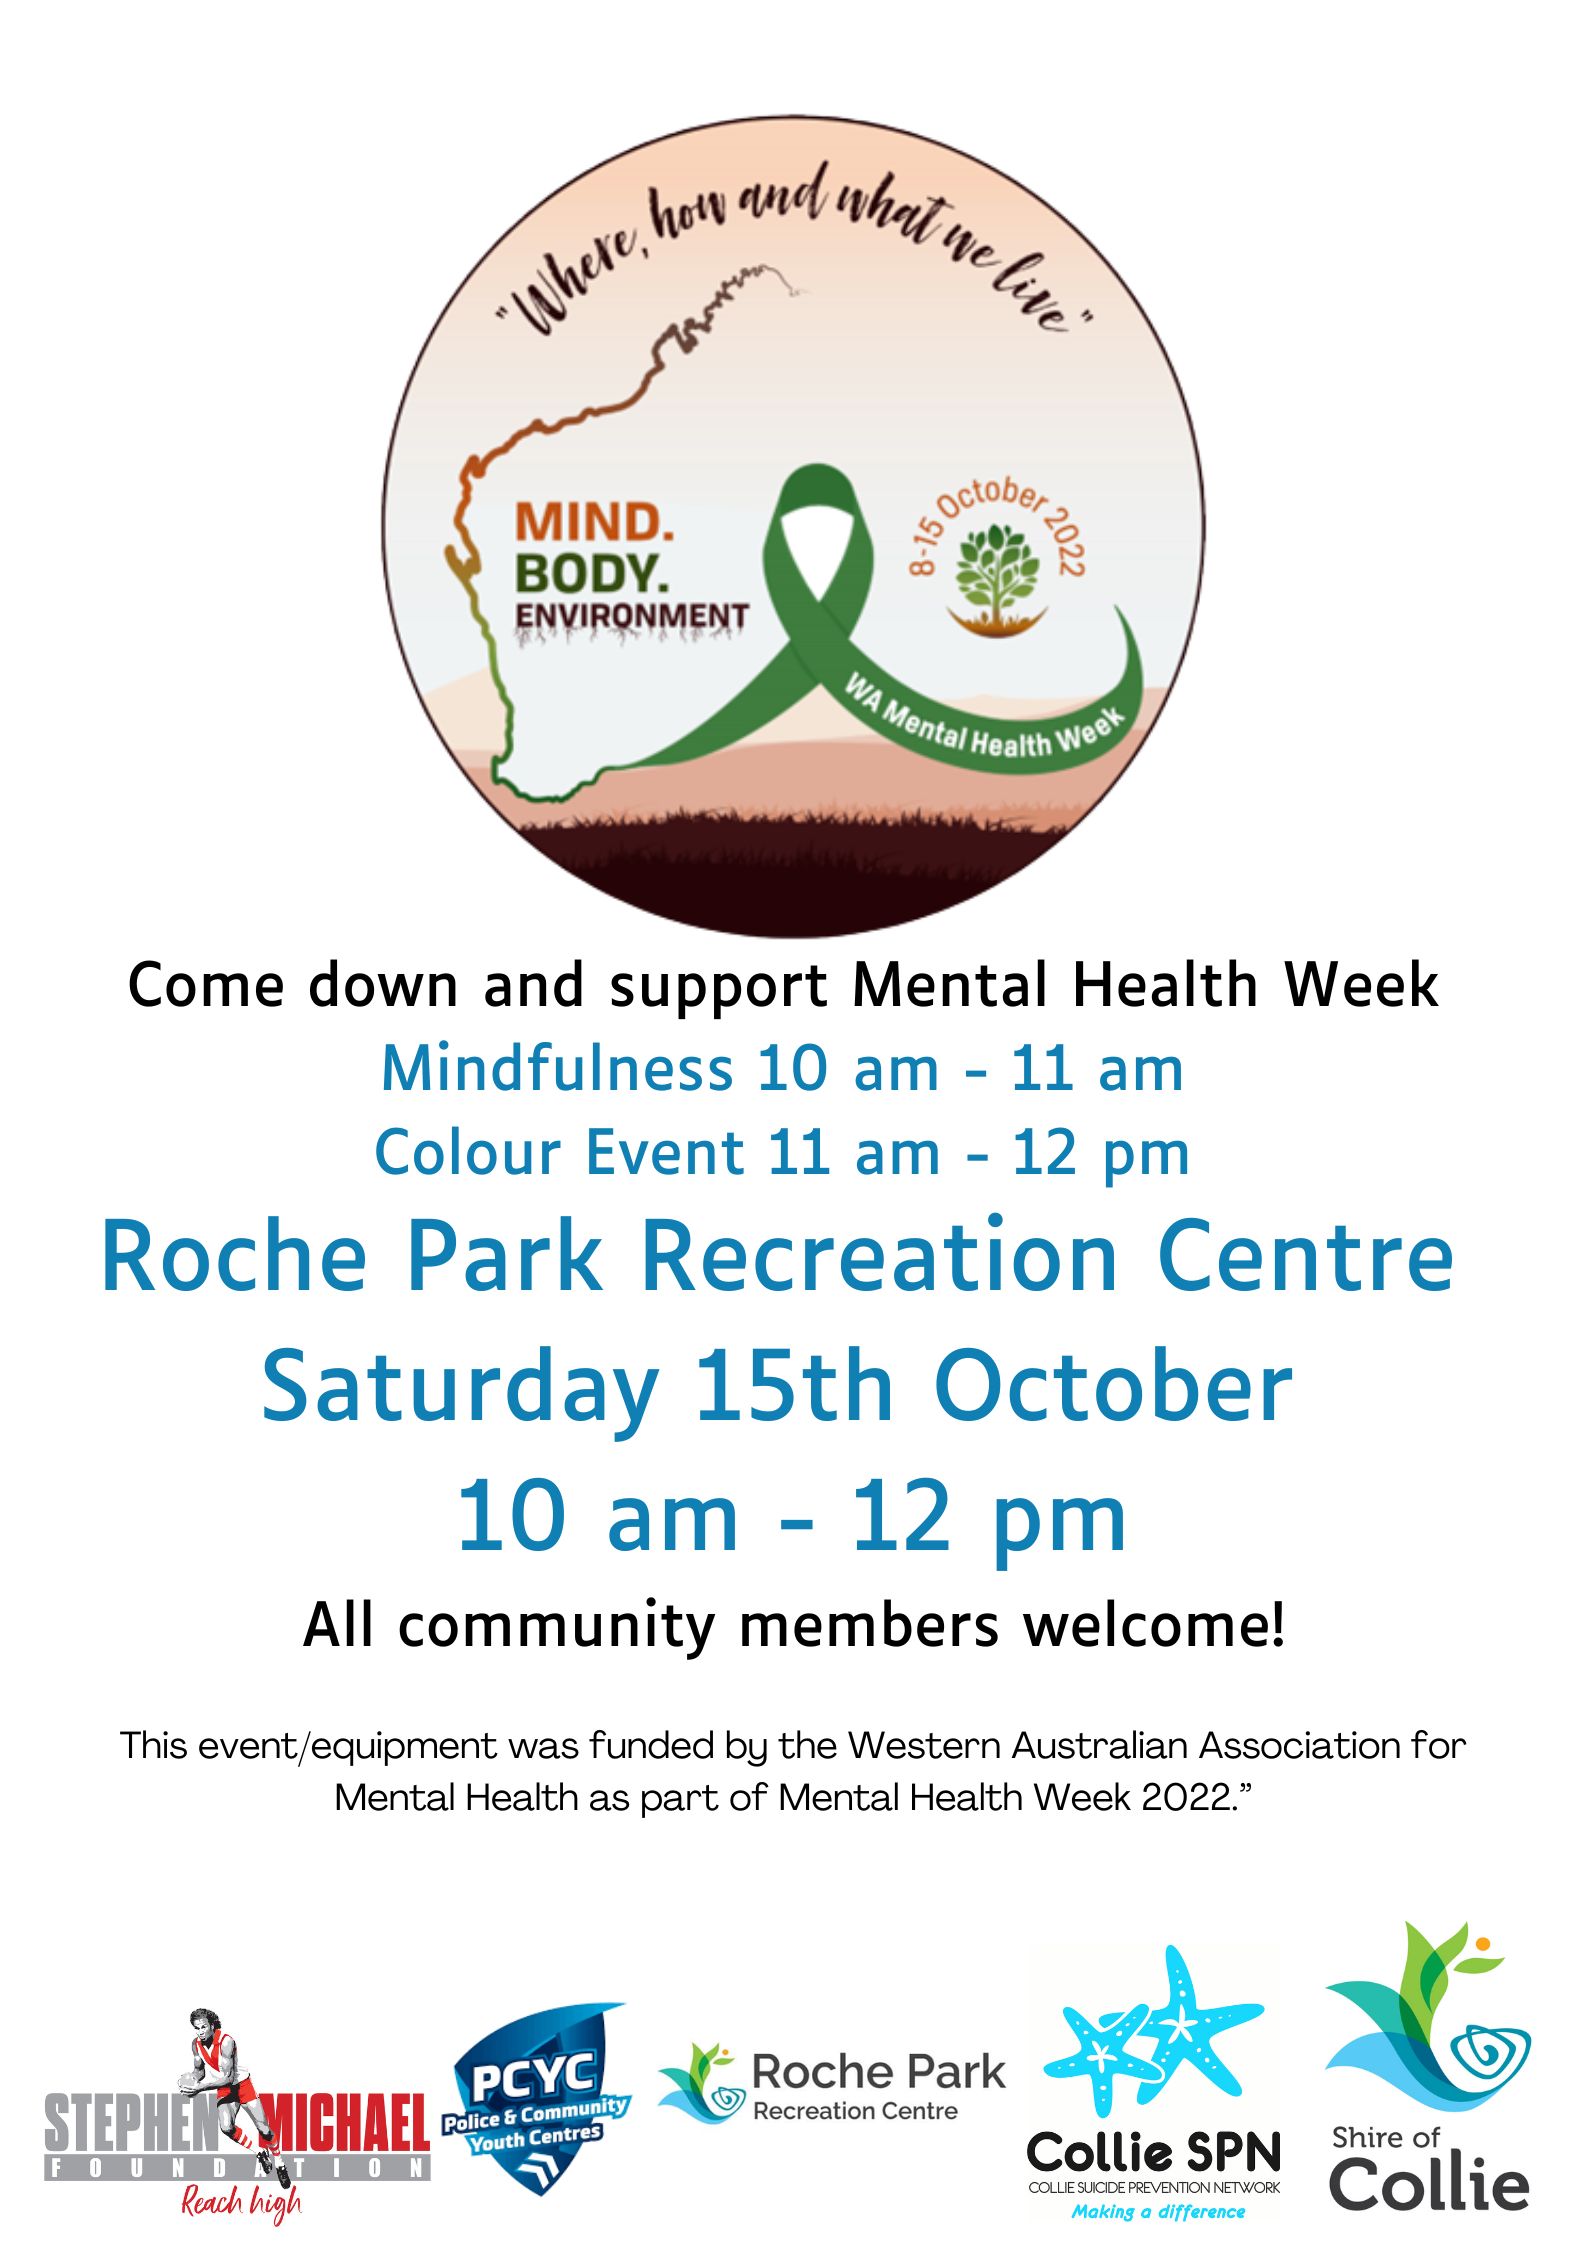 Community Colour Event and Mindfulness